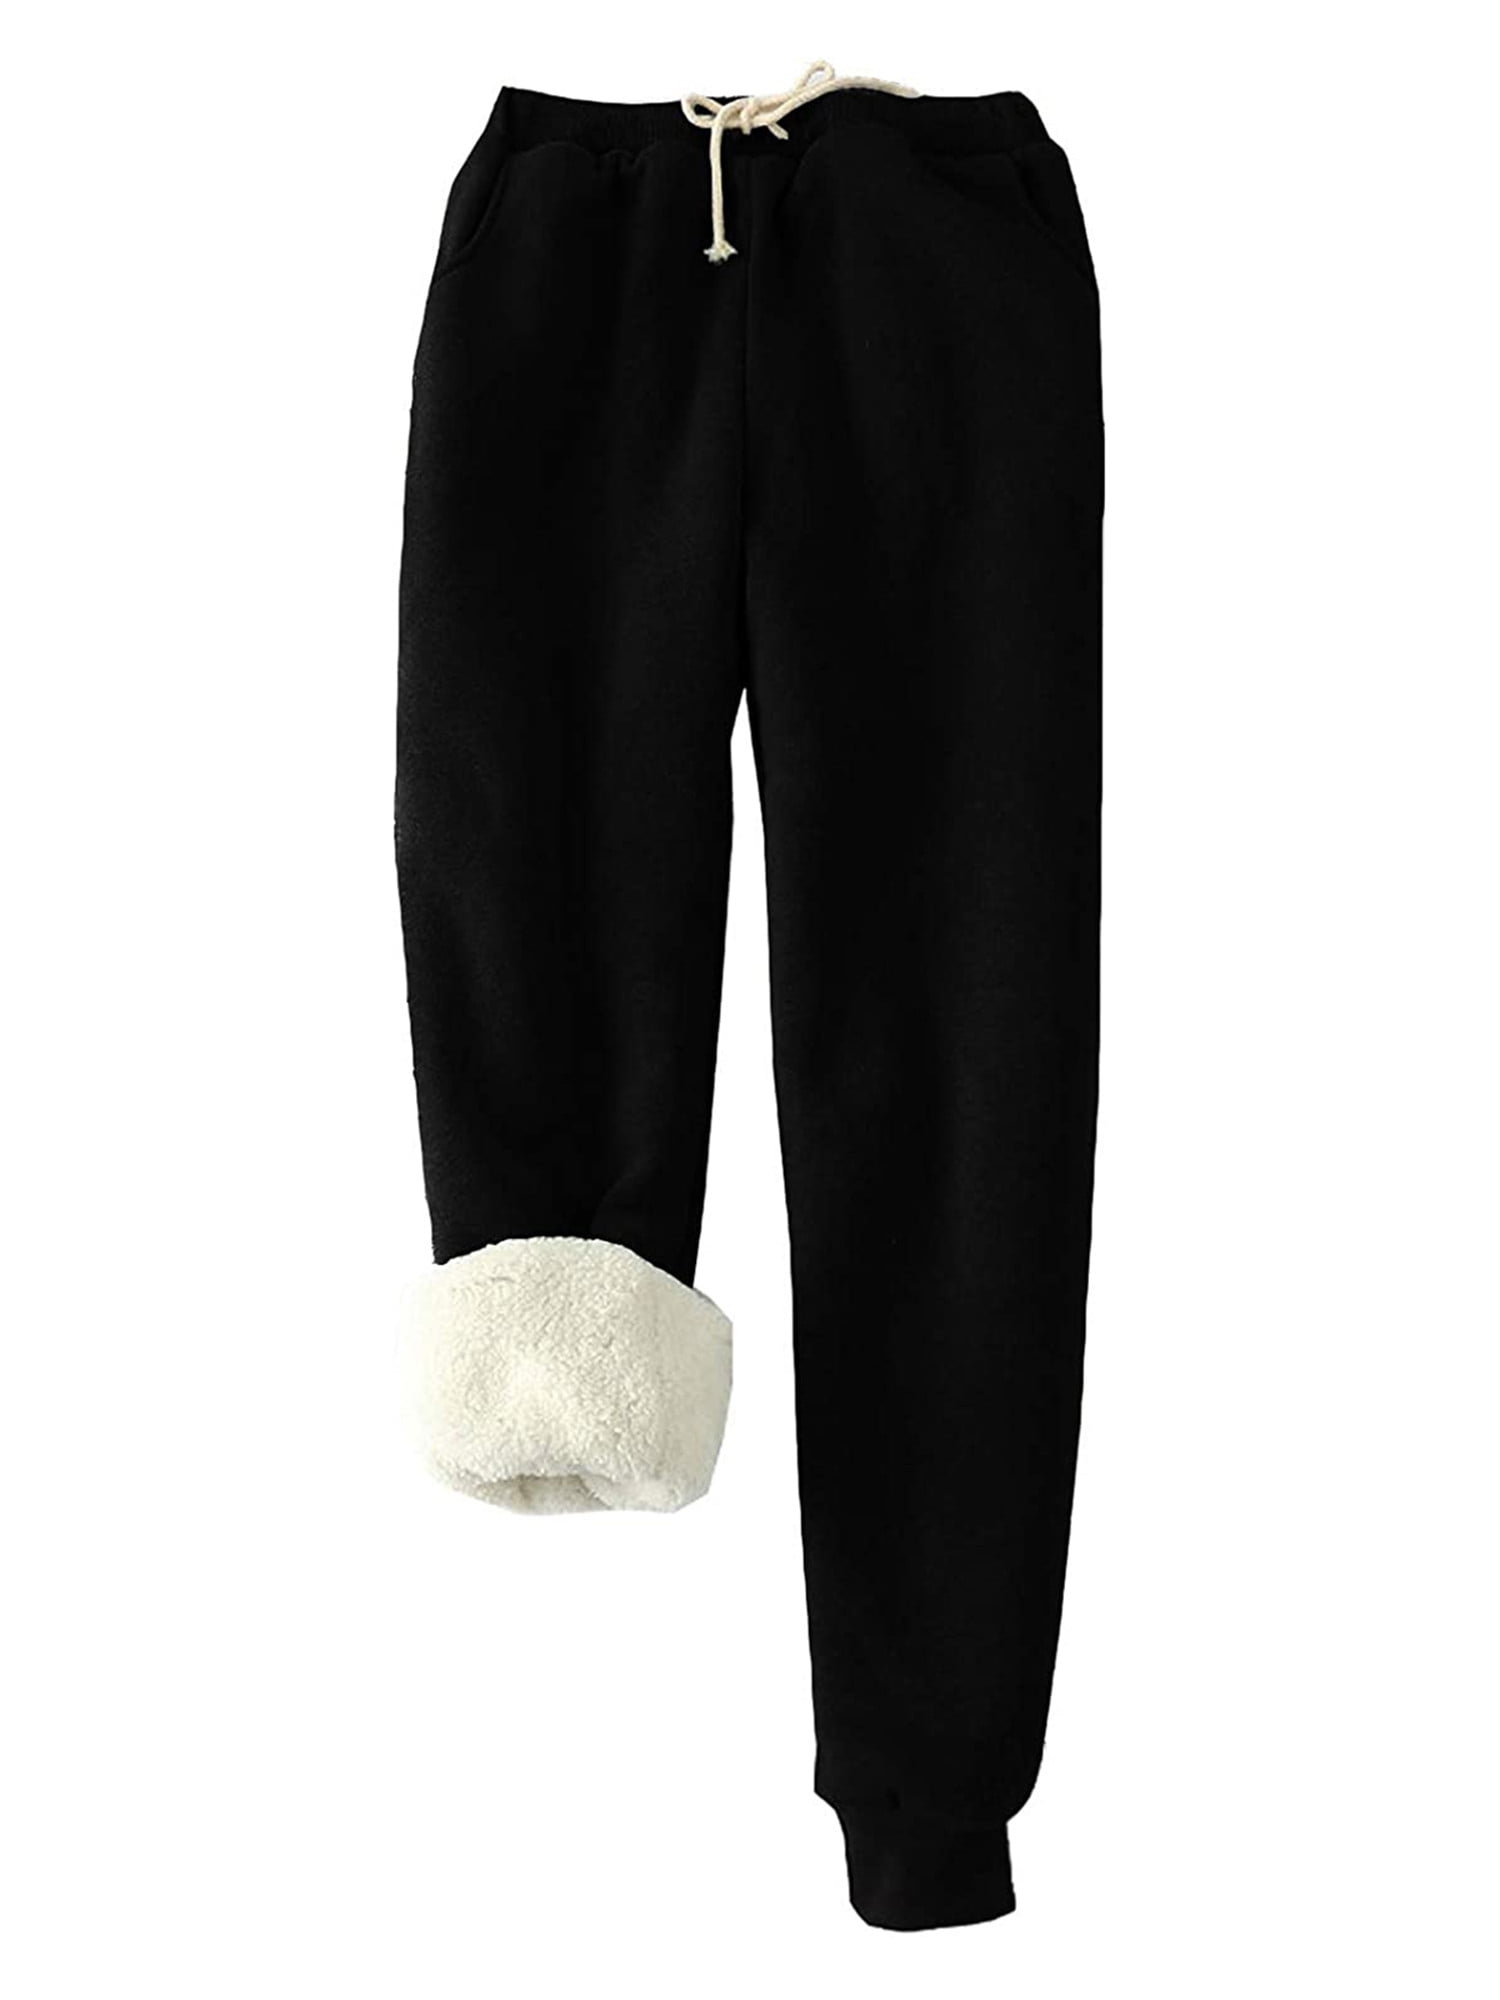 Winter Mens Sports Casual Track Pants Fleece Lined Thick Joggers Loose Trousers 